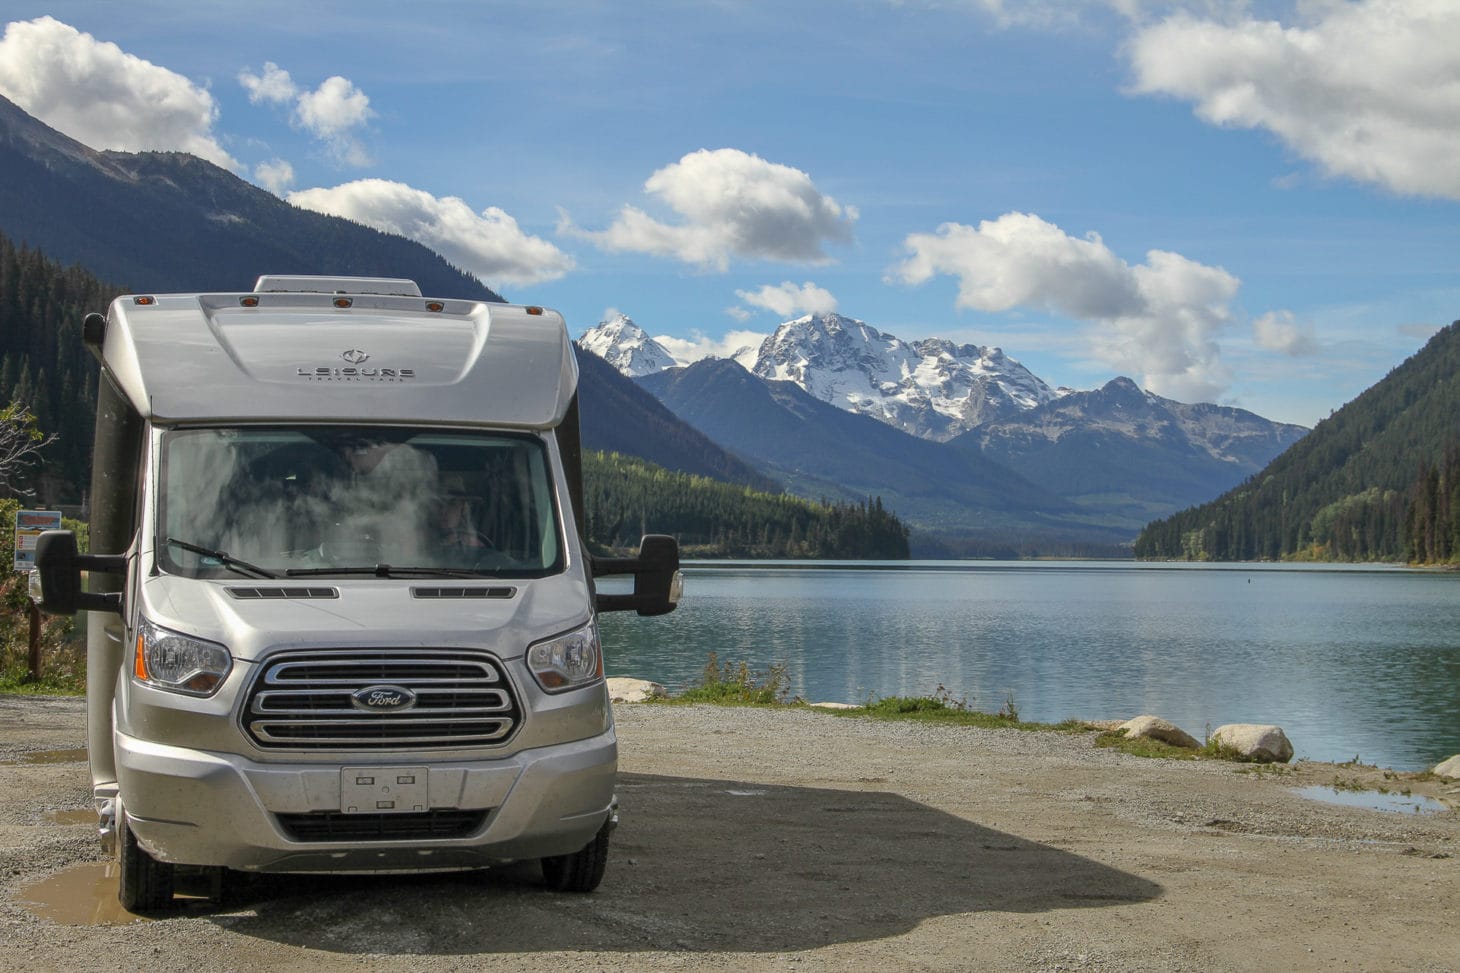 Motorhome parked next to lake with mountain backdrop